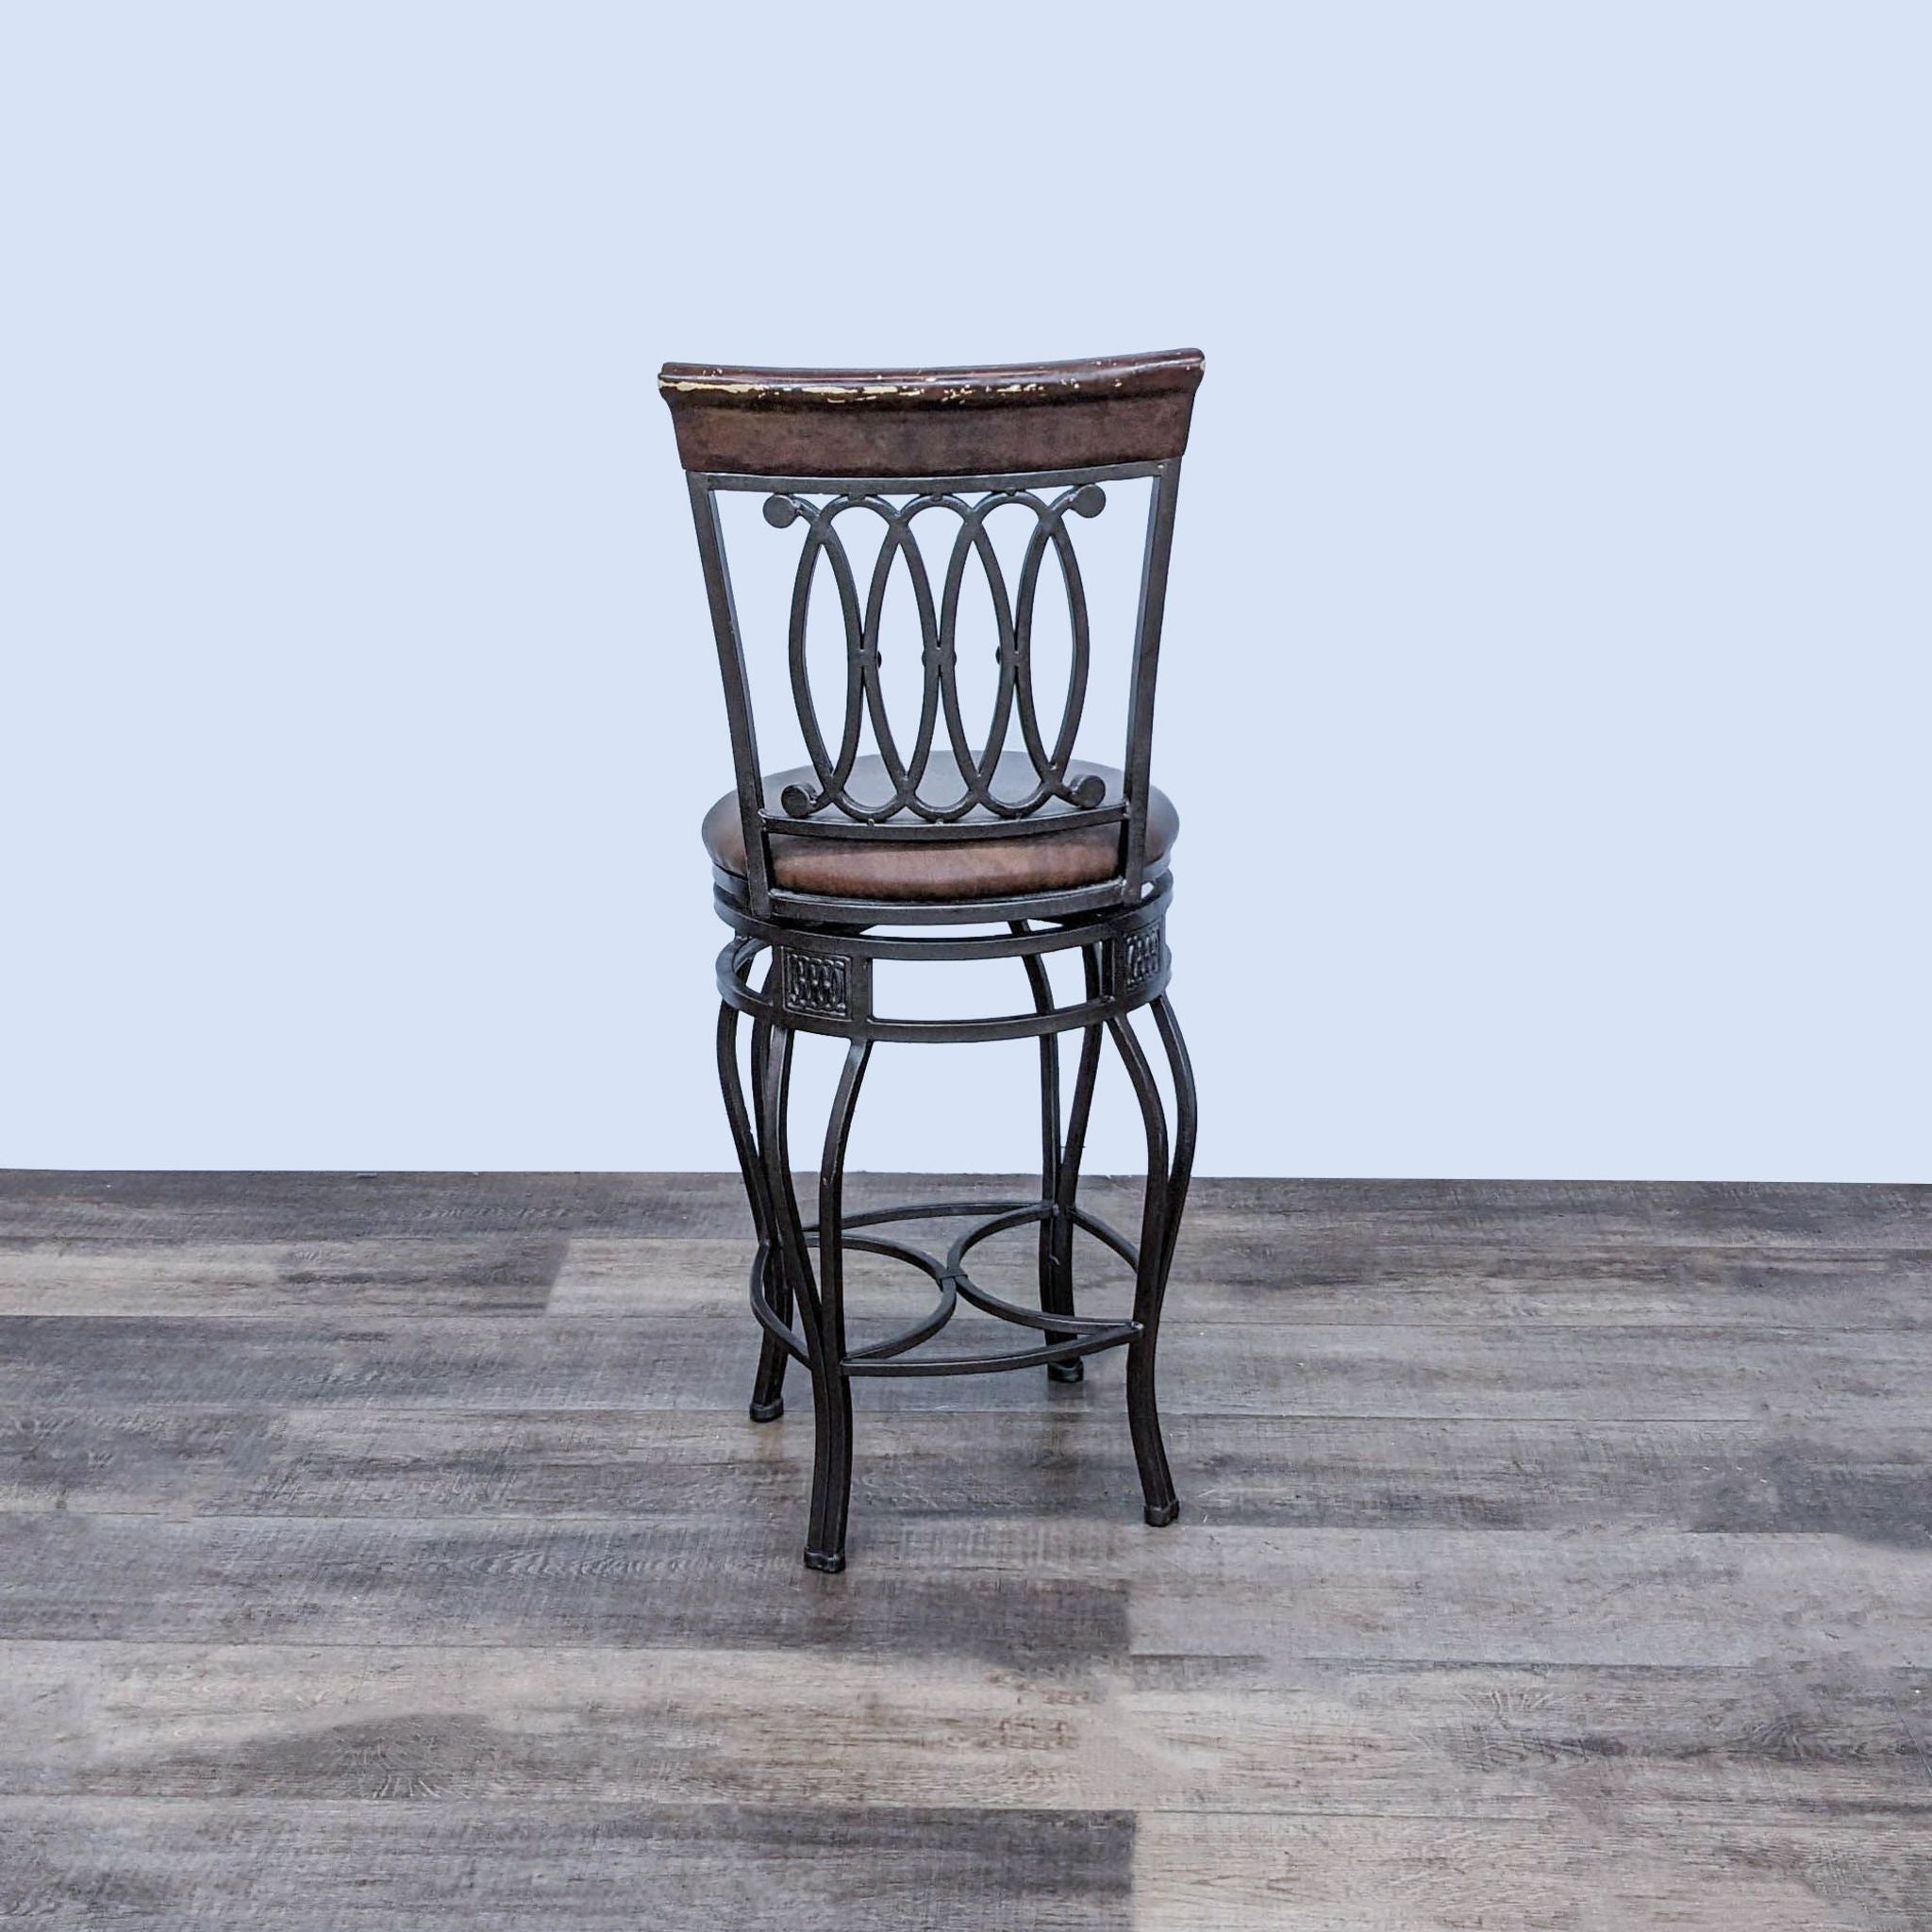 Reperch swivel barstool featuring a padded seat, intricate metal base, and wooden back on a plank floor.